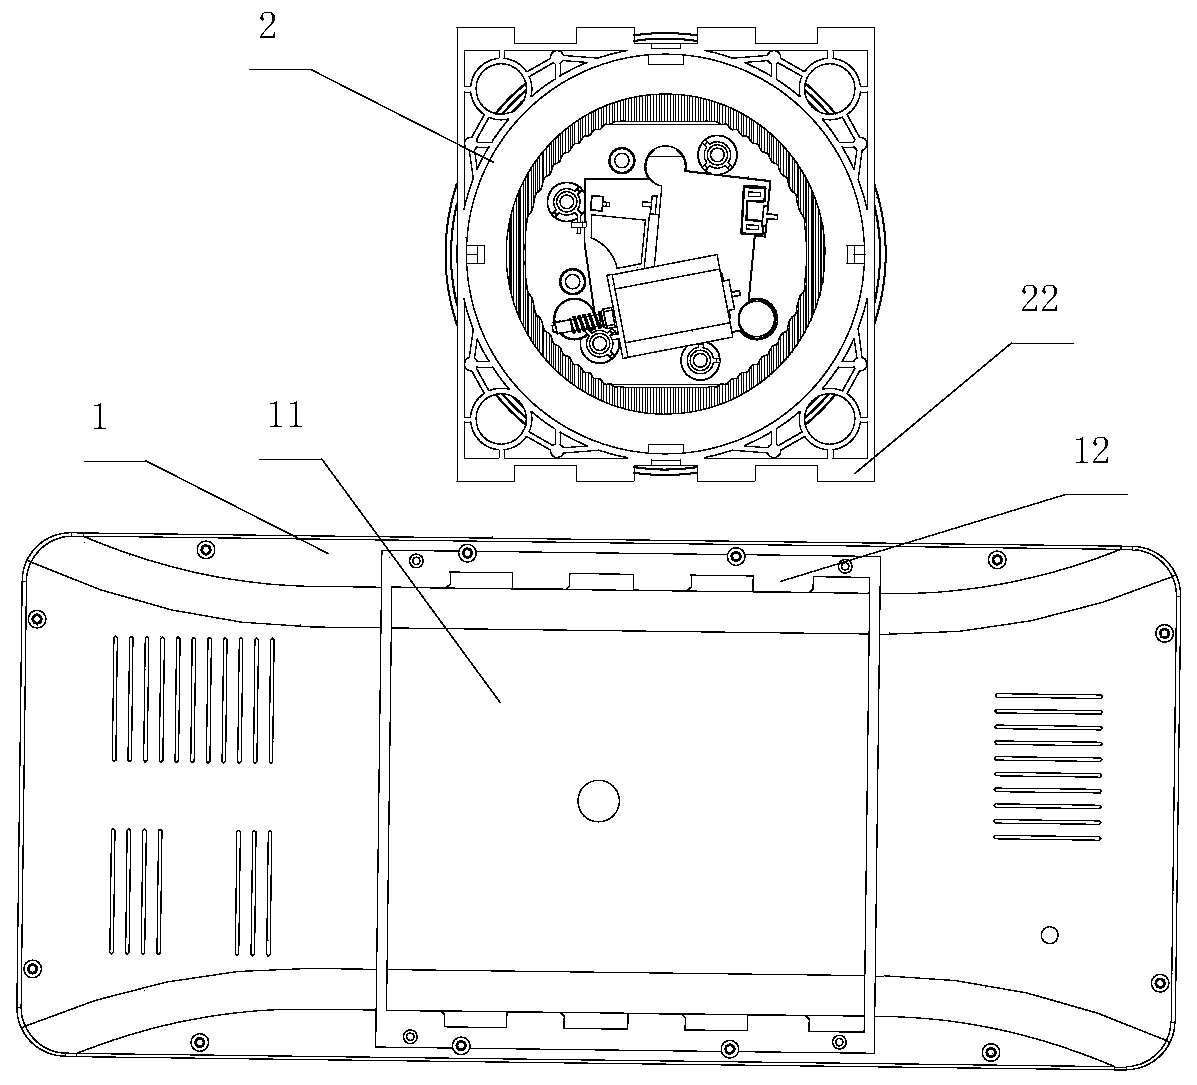 Display mounting assembly in vehicle